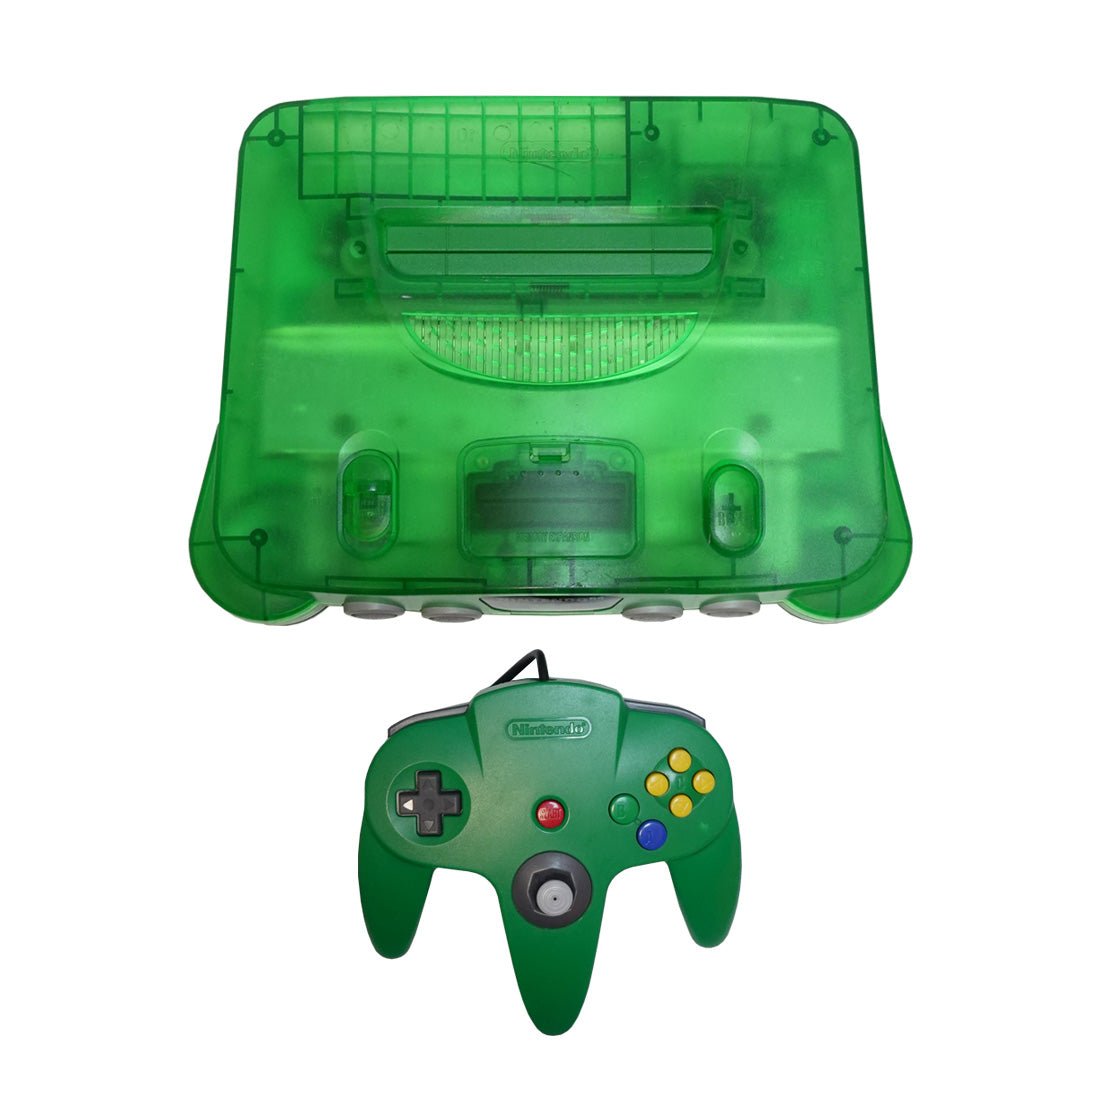 (Pre-Owned) Nintendo 64 Video Game Console - Green - ريترو - Store 974 | ستور ٩٧٤